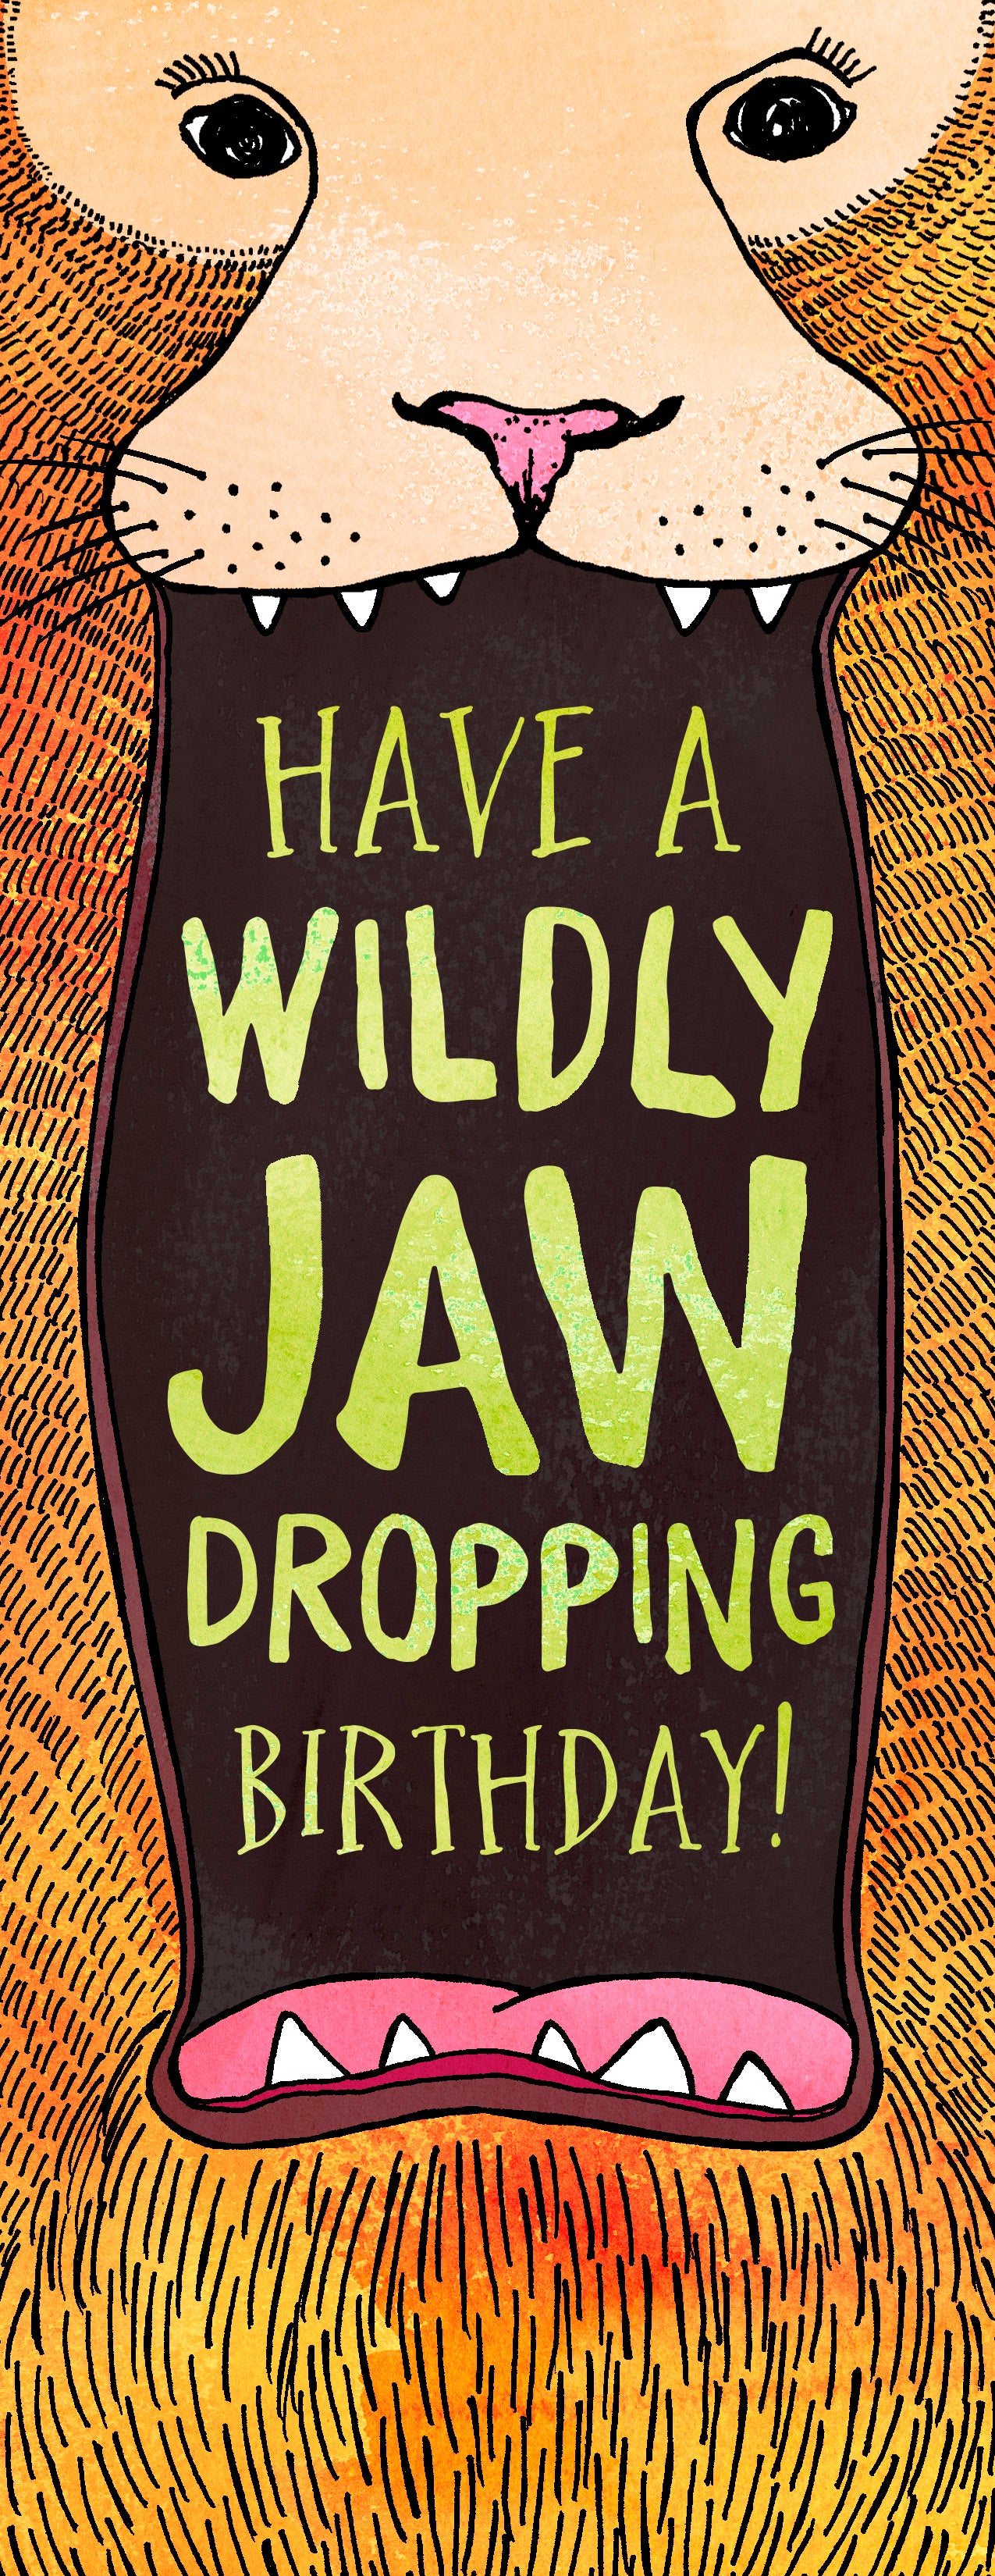 Jawdropping Birthday -  Illustrated Funny Pun Wild Cat Card